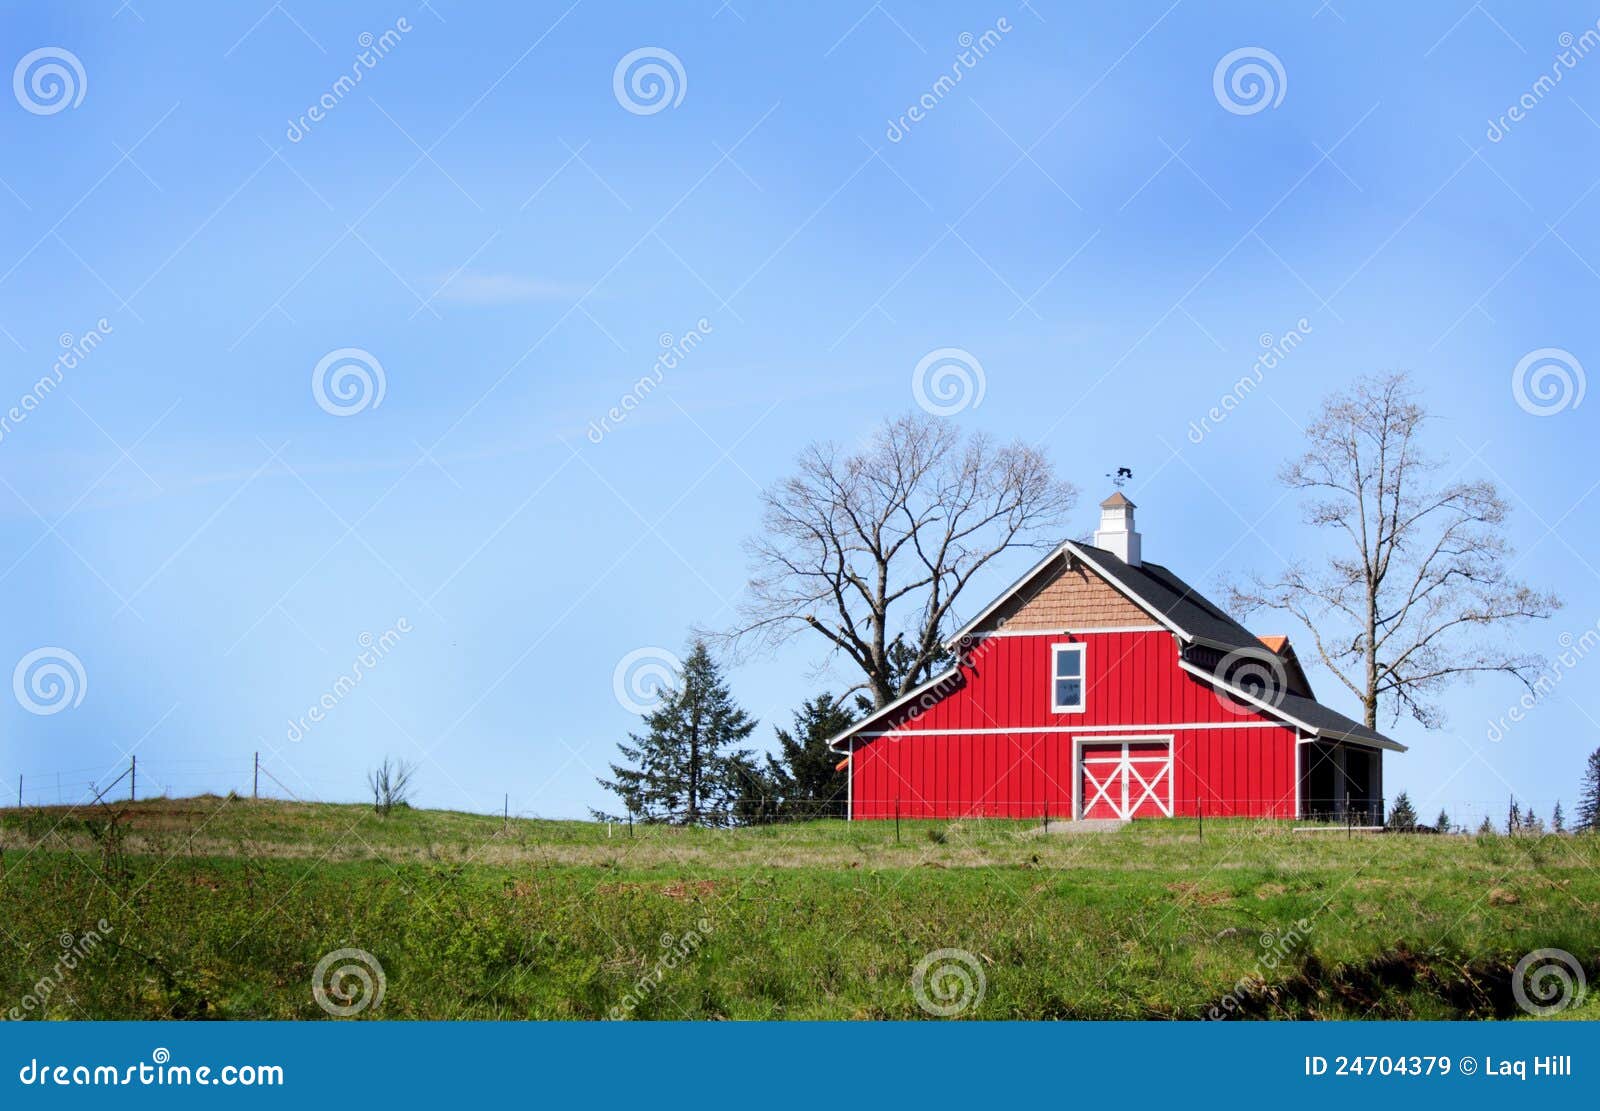 new red barn